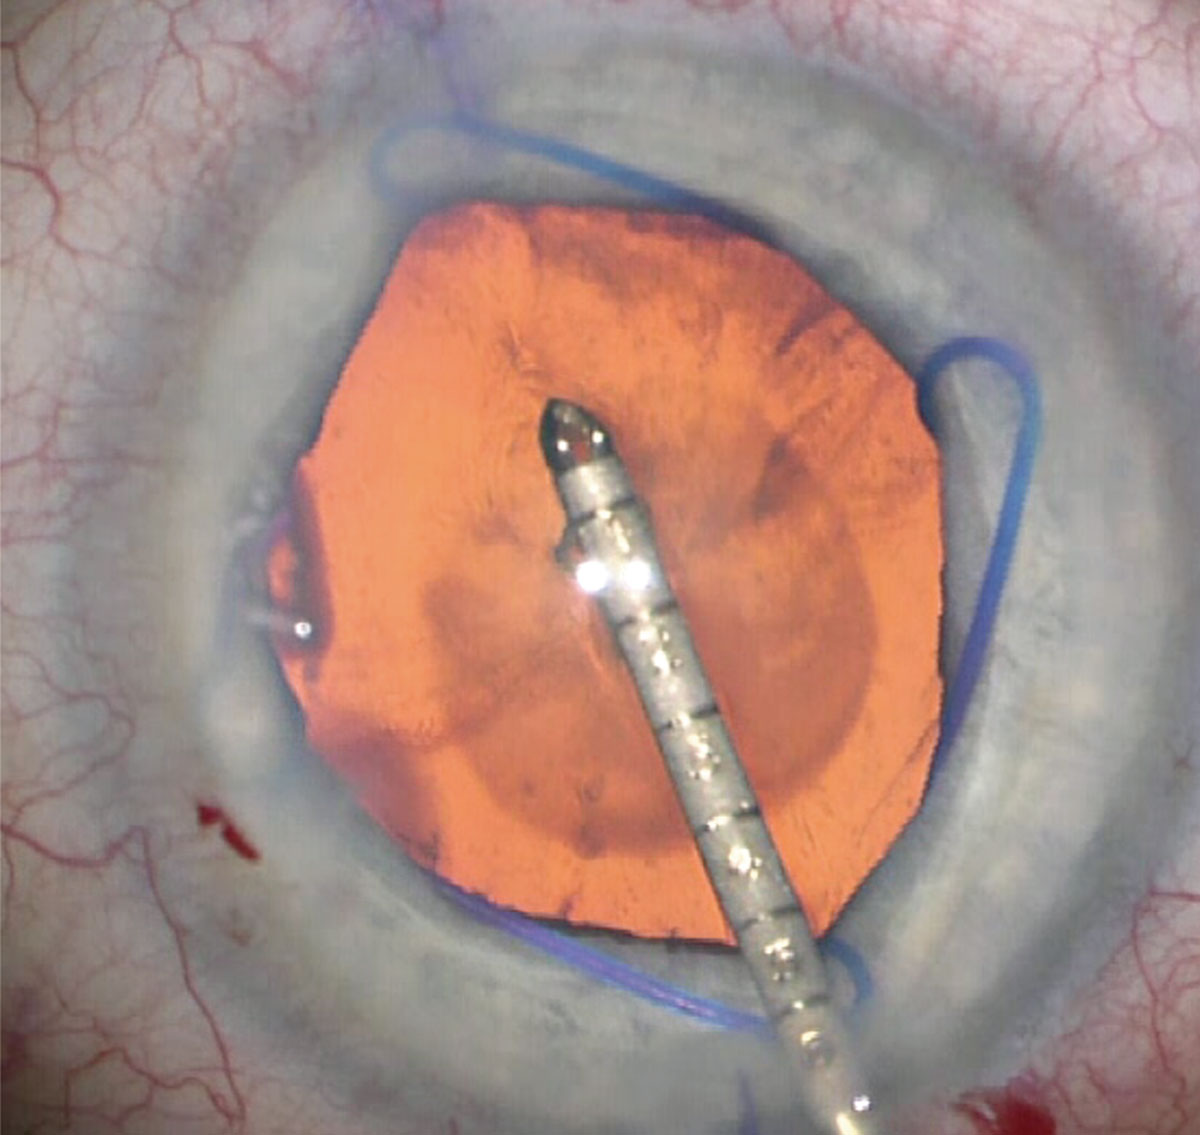 Series of cataract surgeries with I-ring pupil expansion ring